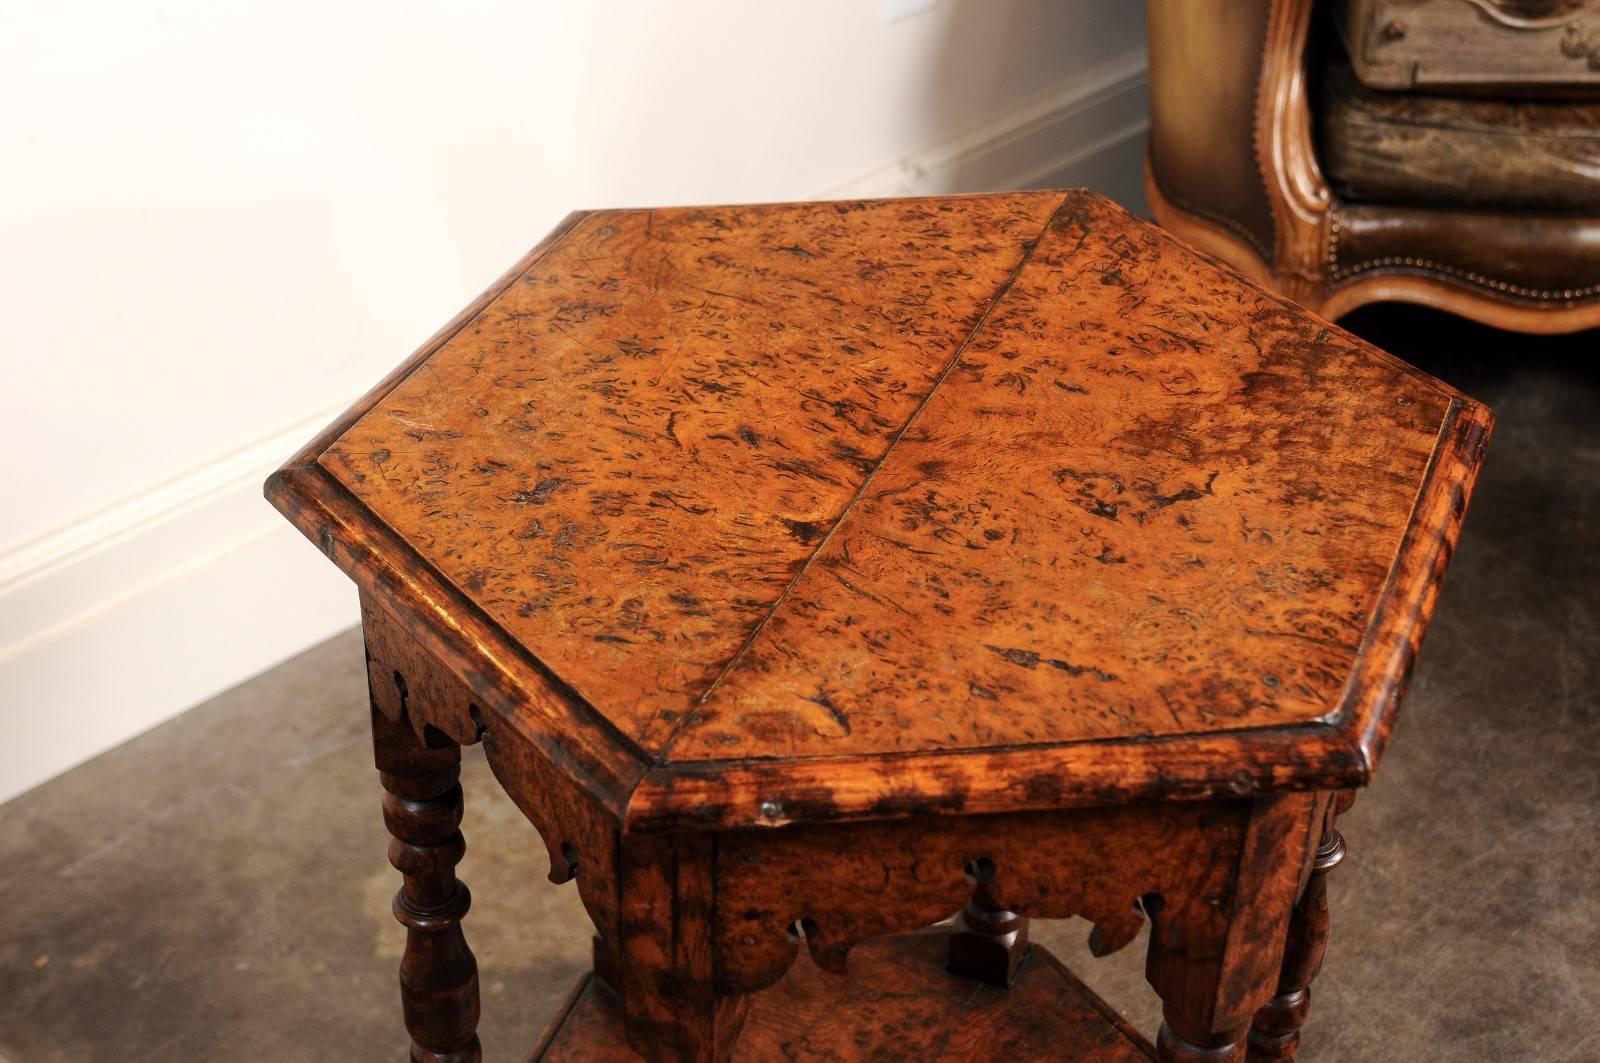 English Burl Wood Hexagonal Side Table with Turned Legs and Richly Carved Apron In Good Condition For Sale In Atlanta, GA